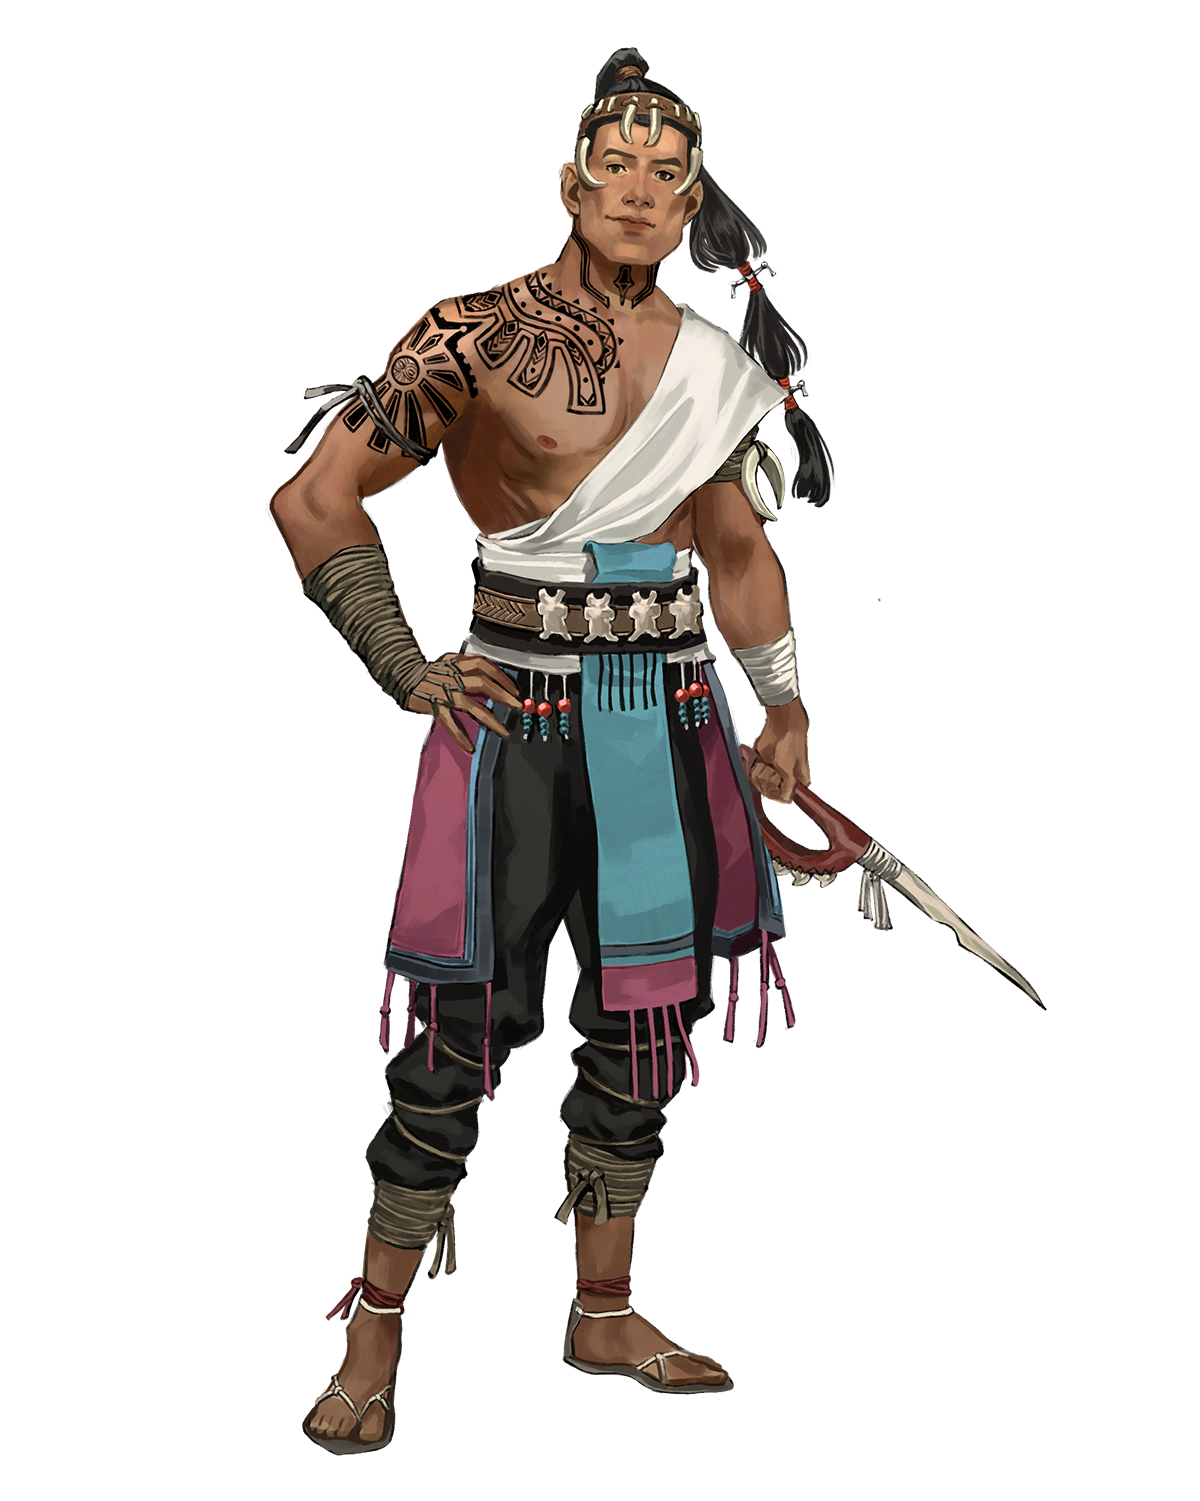 Taiwalei - a human man with dark tan skin and long black hair in a decorative ponytail with geometric black tattoos on his shoulder and arm and a dragon tooth blade in his hand. He looks friendly